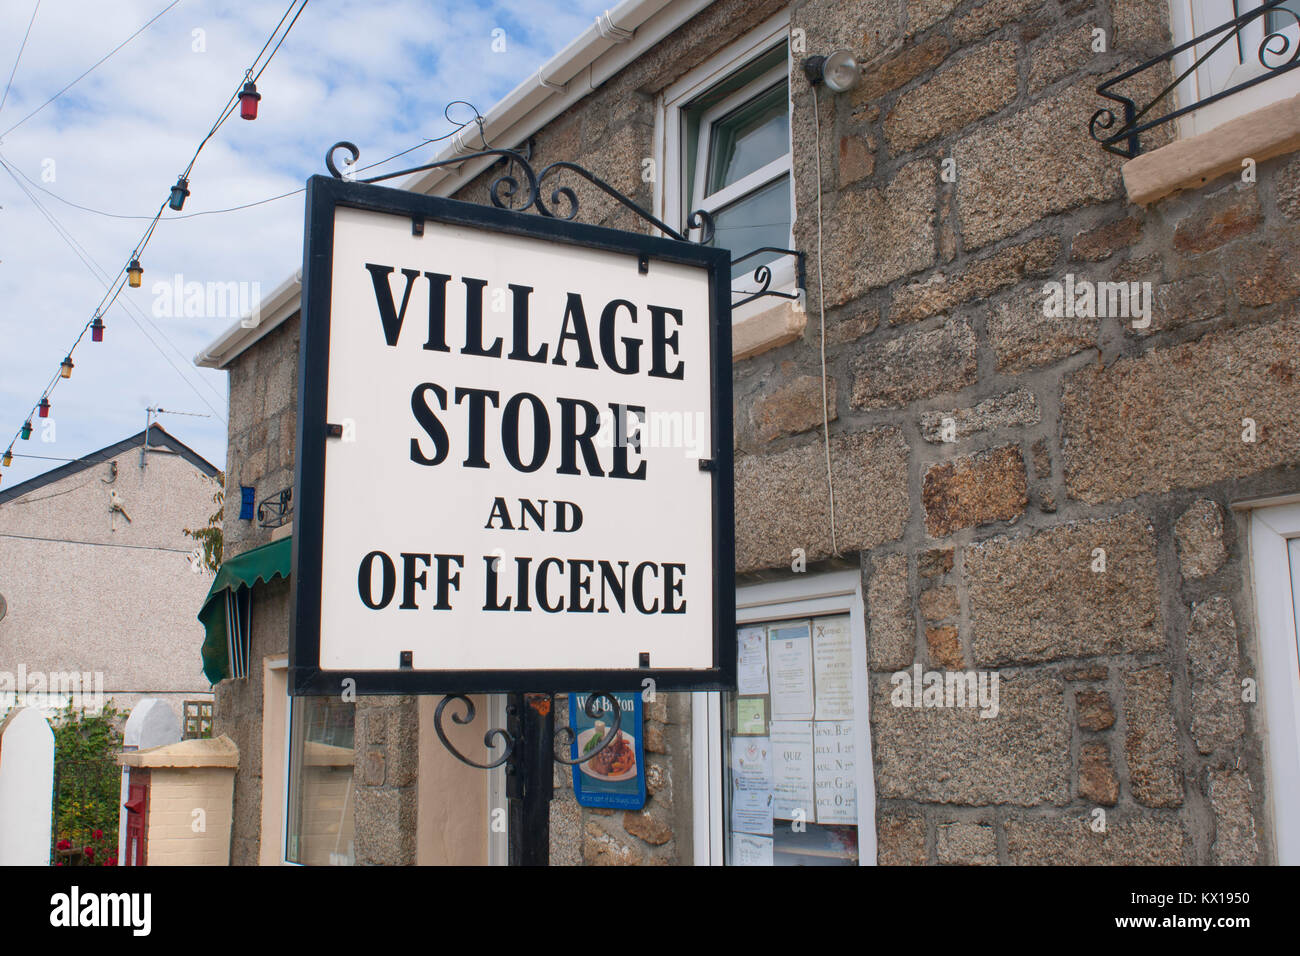 A village stores and off licence sign - John Gollop Stock Photo